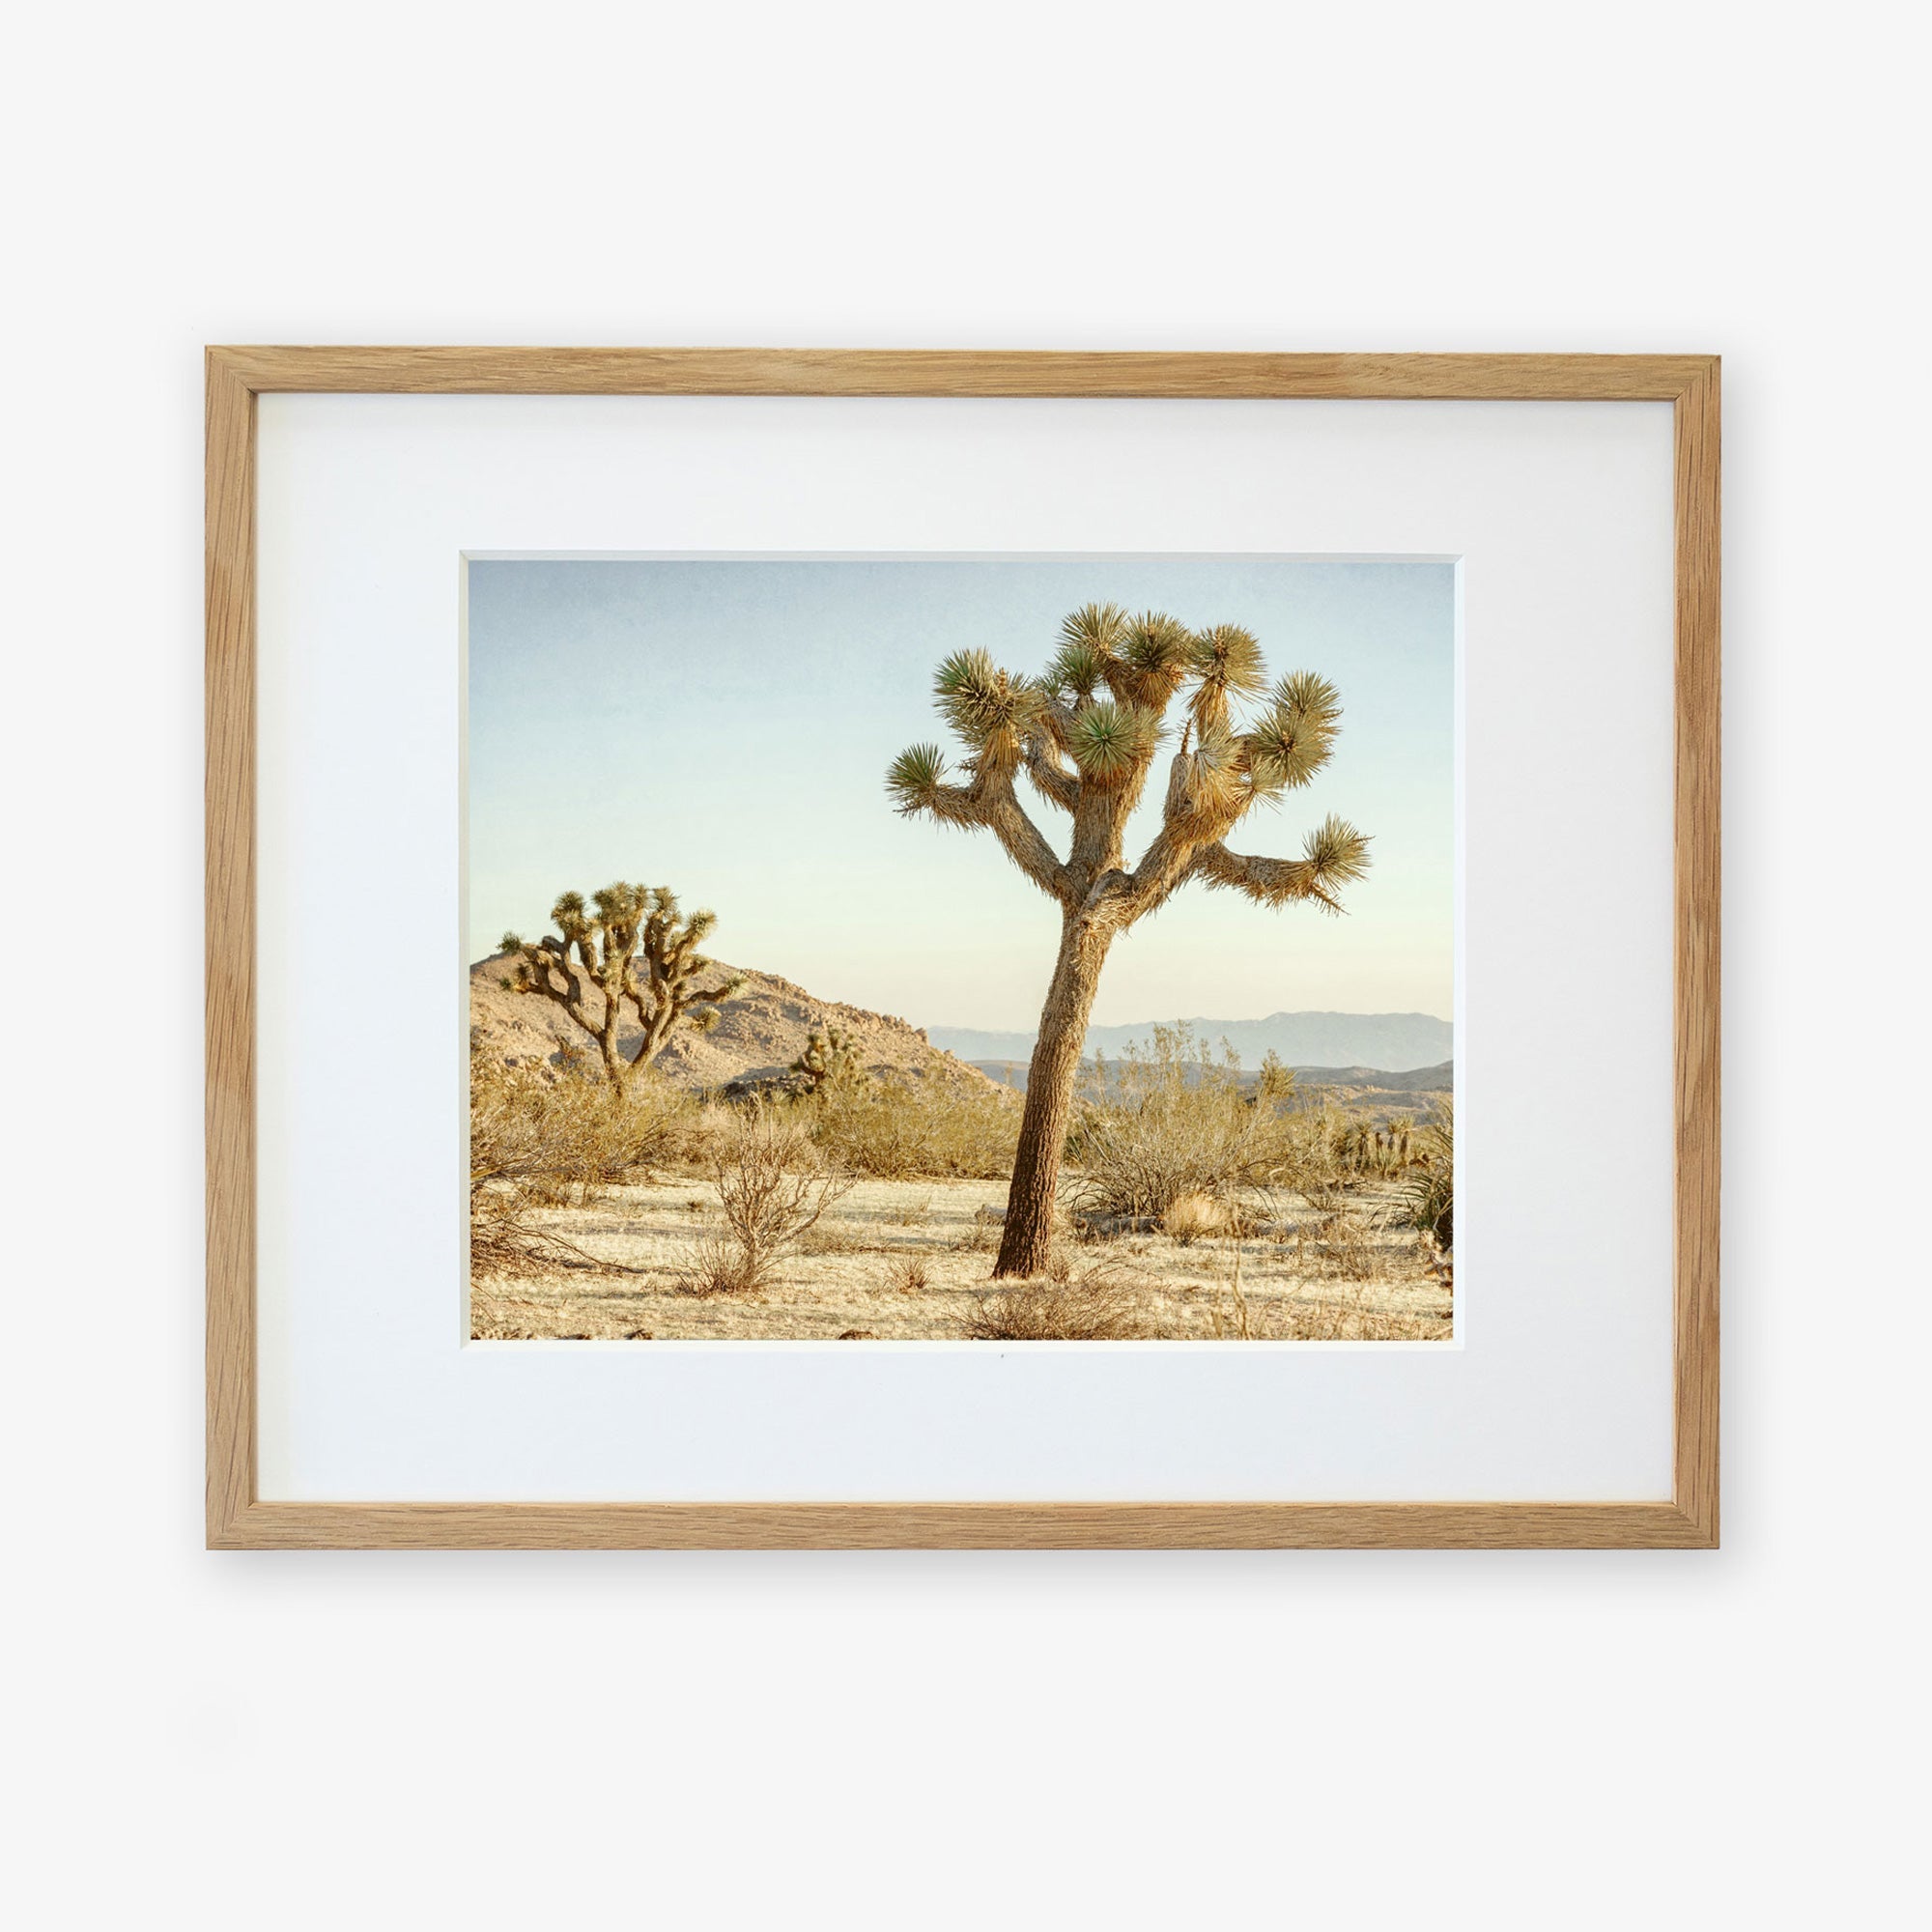 A framed print of a &#39;Mighty Joshua&#39; in a dry desert landscape, displayed against a white background. The frame is simple and wooden, complementing the natural scene.